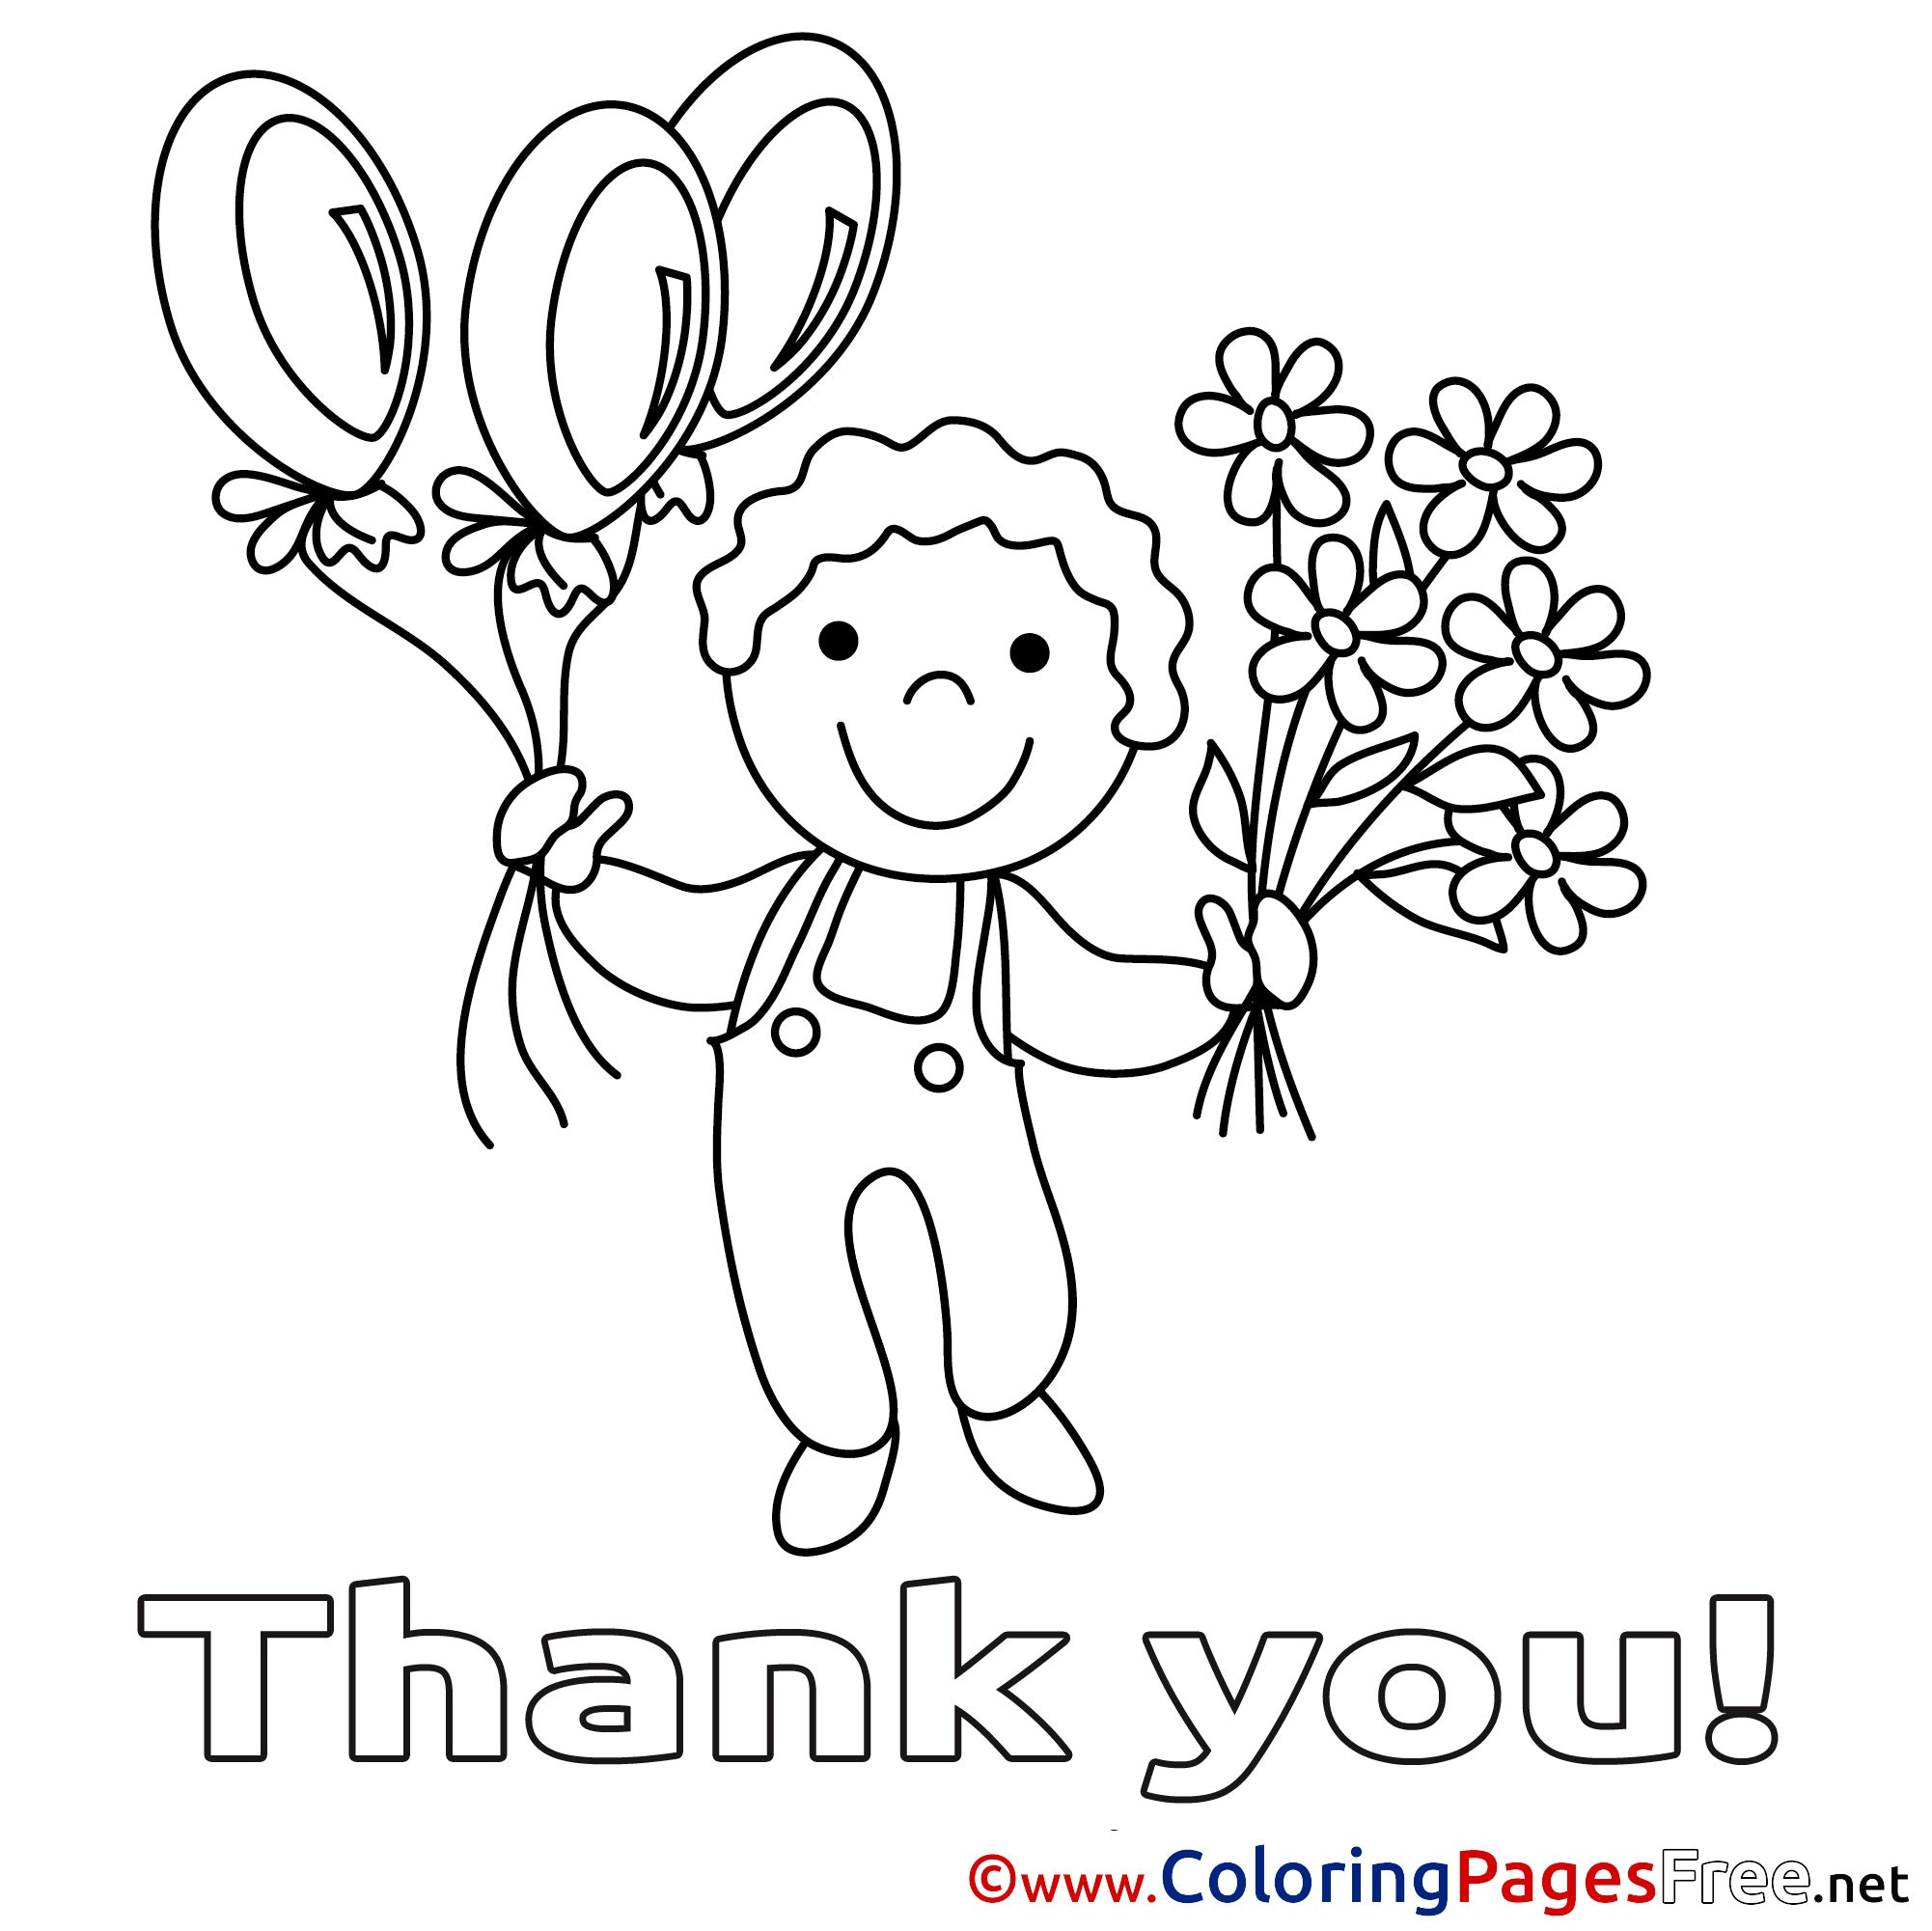 Thinking Of You Coloring Pages
 Thinking You Coloring Pages Coloring Book